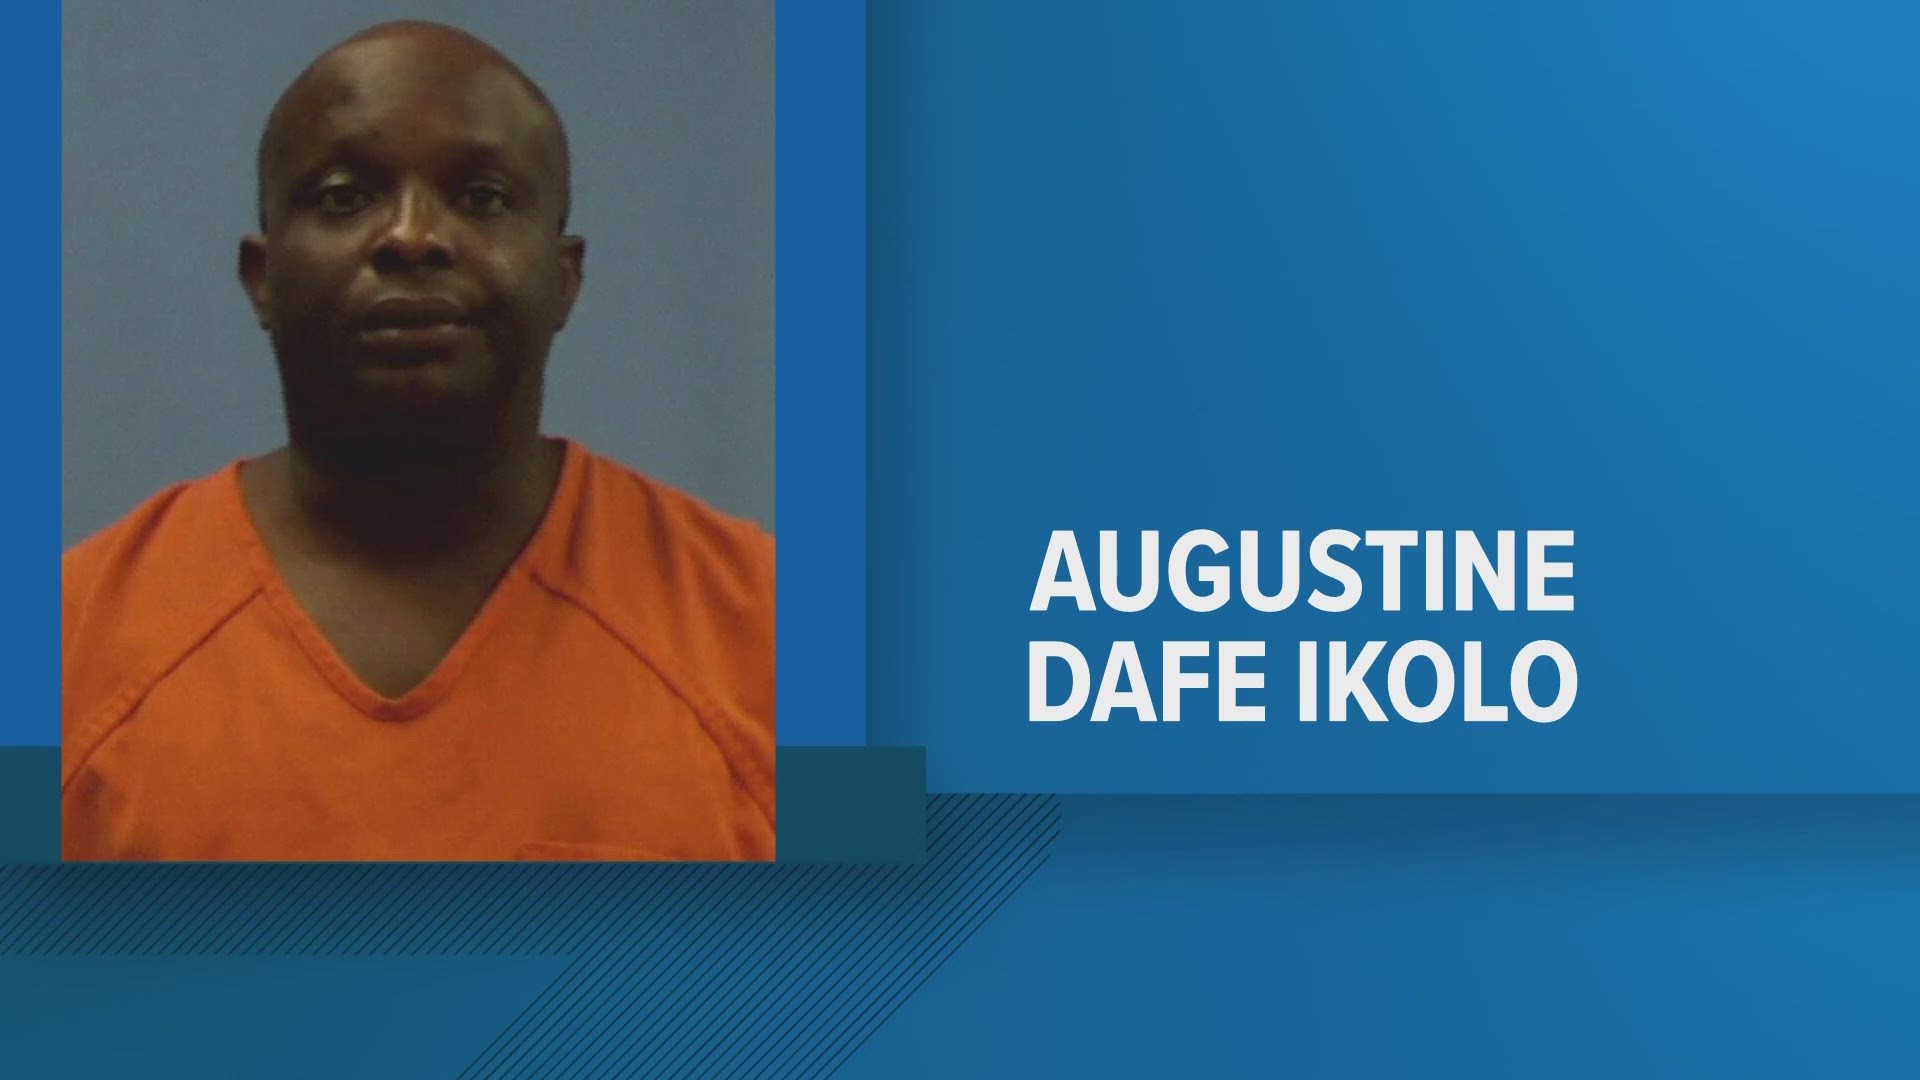 The district attorney’s office said 44-year-old Augustine Dafe Ikolo was found guilty in November 2023 of assaulting a woman he met on a dating app.